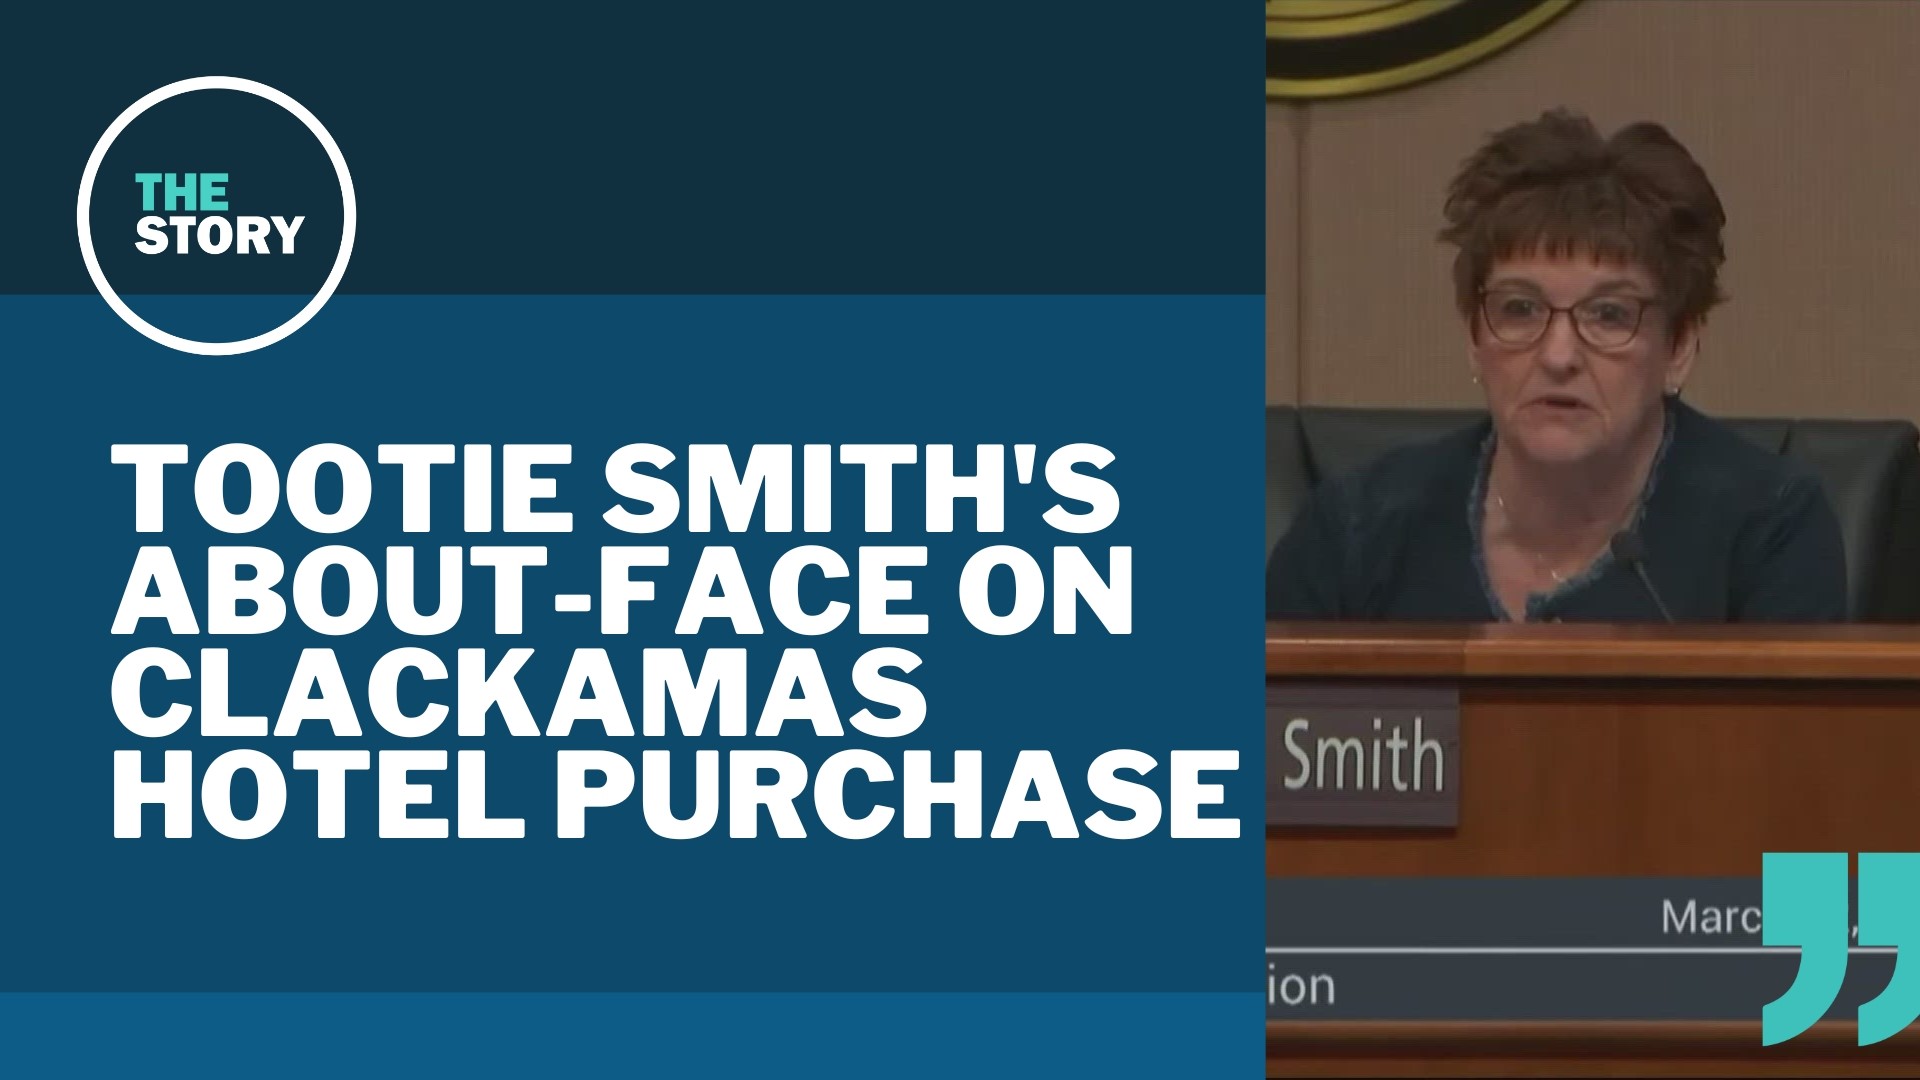 KGW spoke with Smith to get a clearer picture of why she reversed her tie-breaking vote on the “Project Turnkey” concept. Here’s what she had to say.